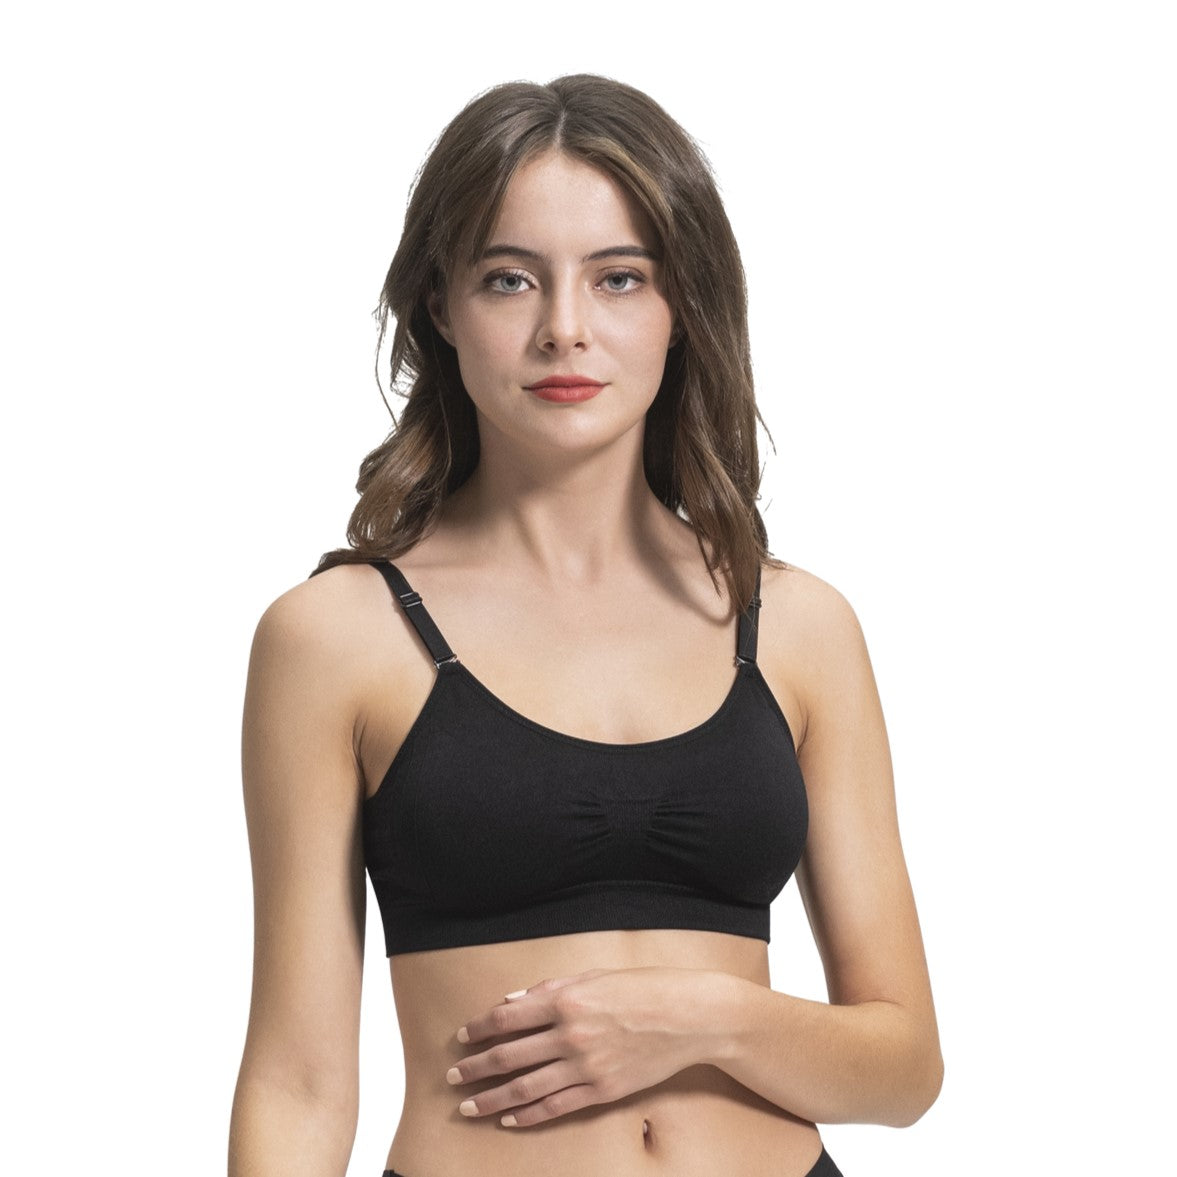 Sherry 44D Size Bra in Durg - Dealers, Manufacturers & Suppliers